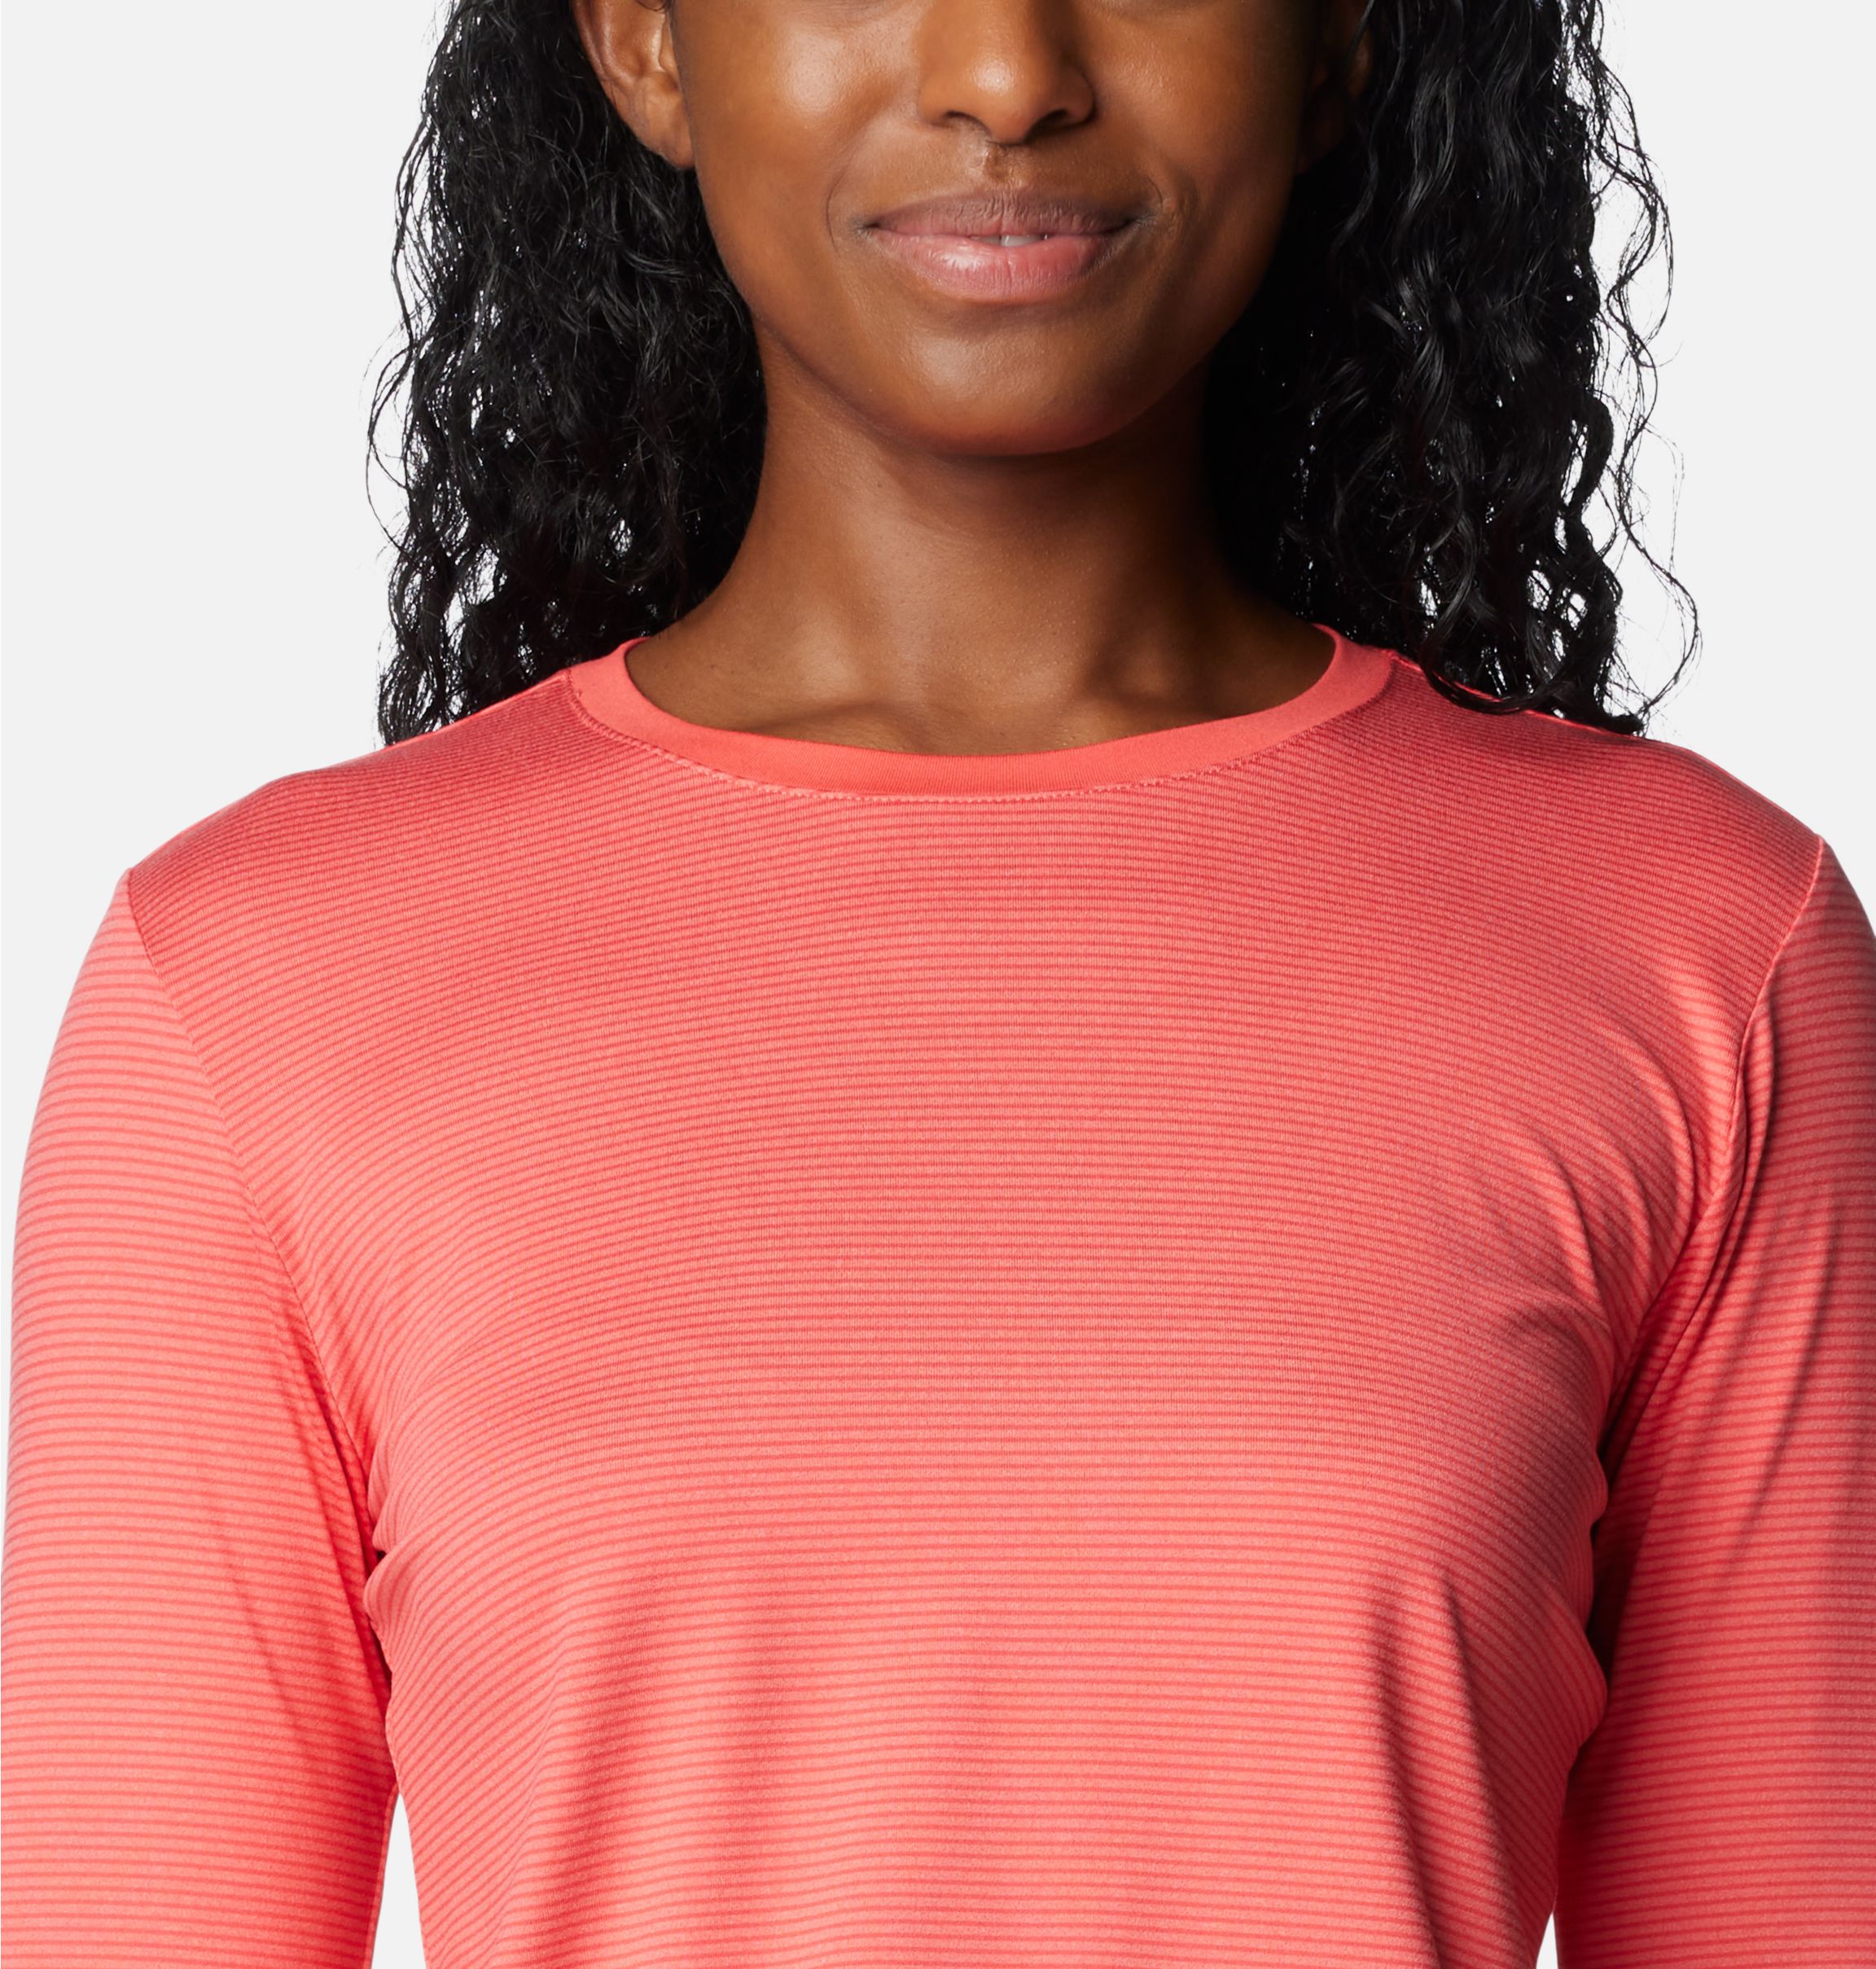 Up To 78% Off on LESIES Women's Long Sleeve Mo